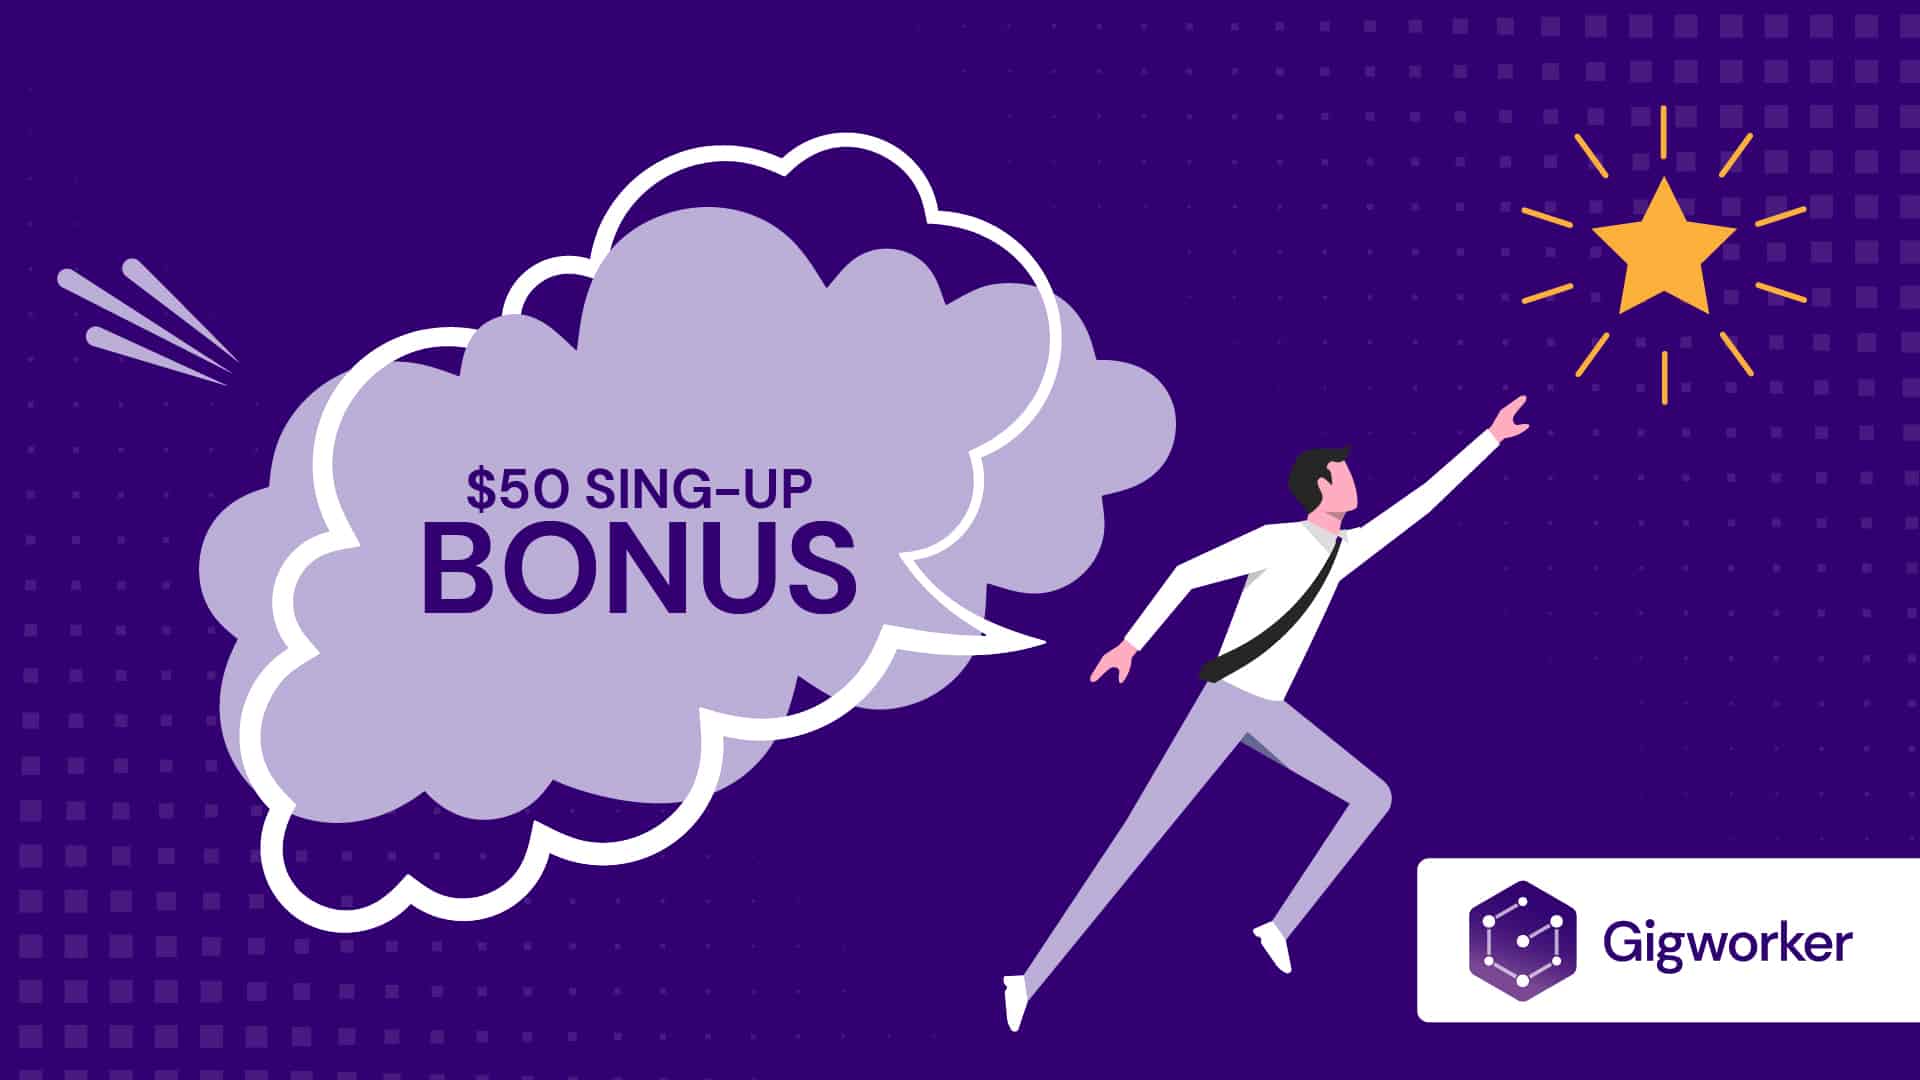 vector graphic showing an illustration of a person who has gotten a $50 bonus related to 50 sign up bonus